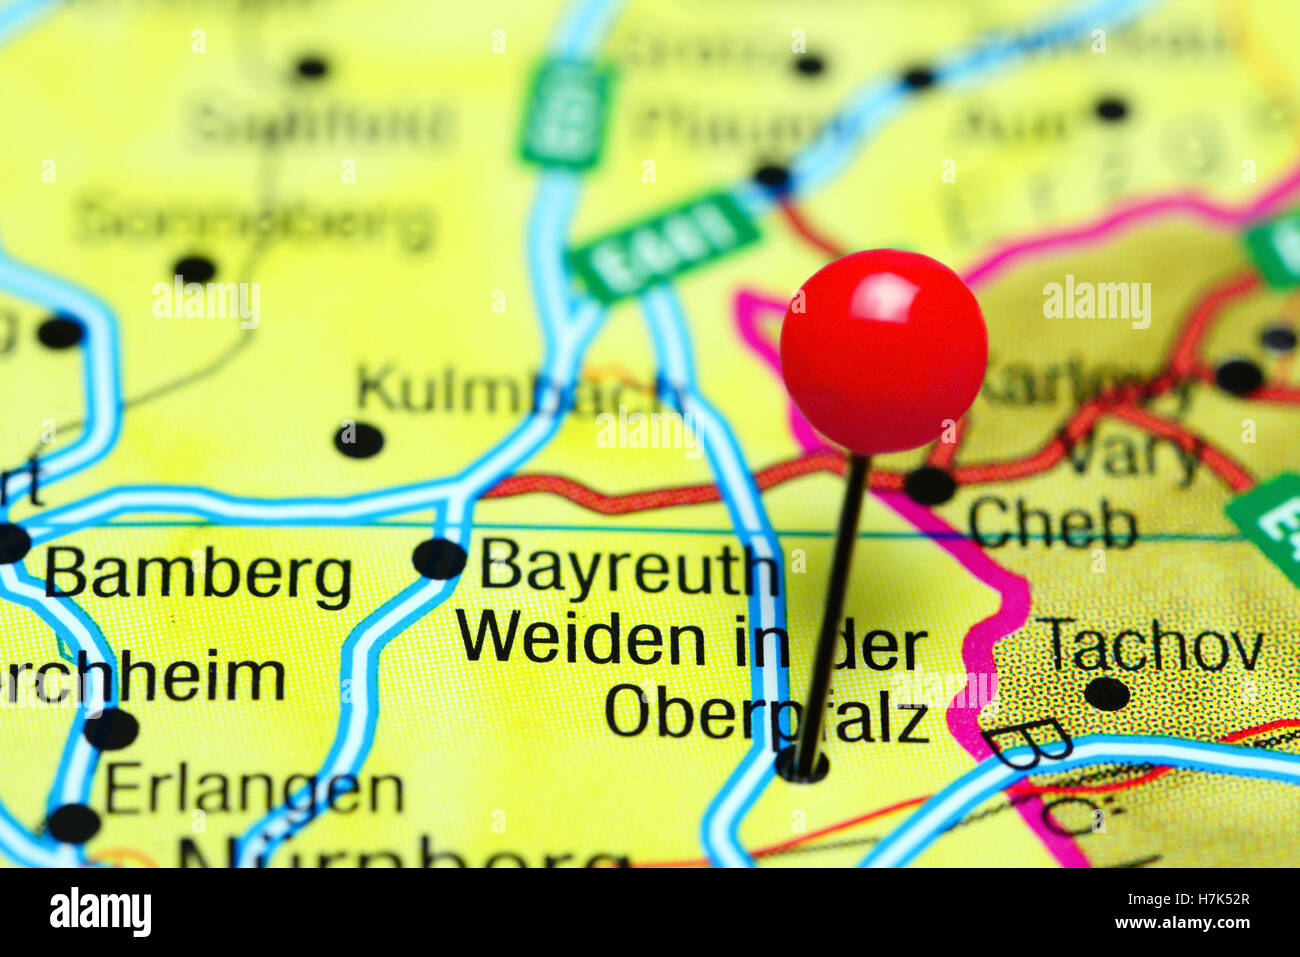 Weiden in der Oberpfalz pinned on a map of Germany Stock Photo